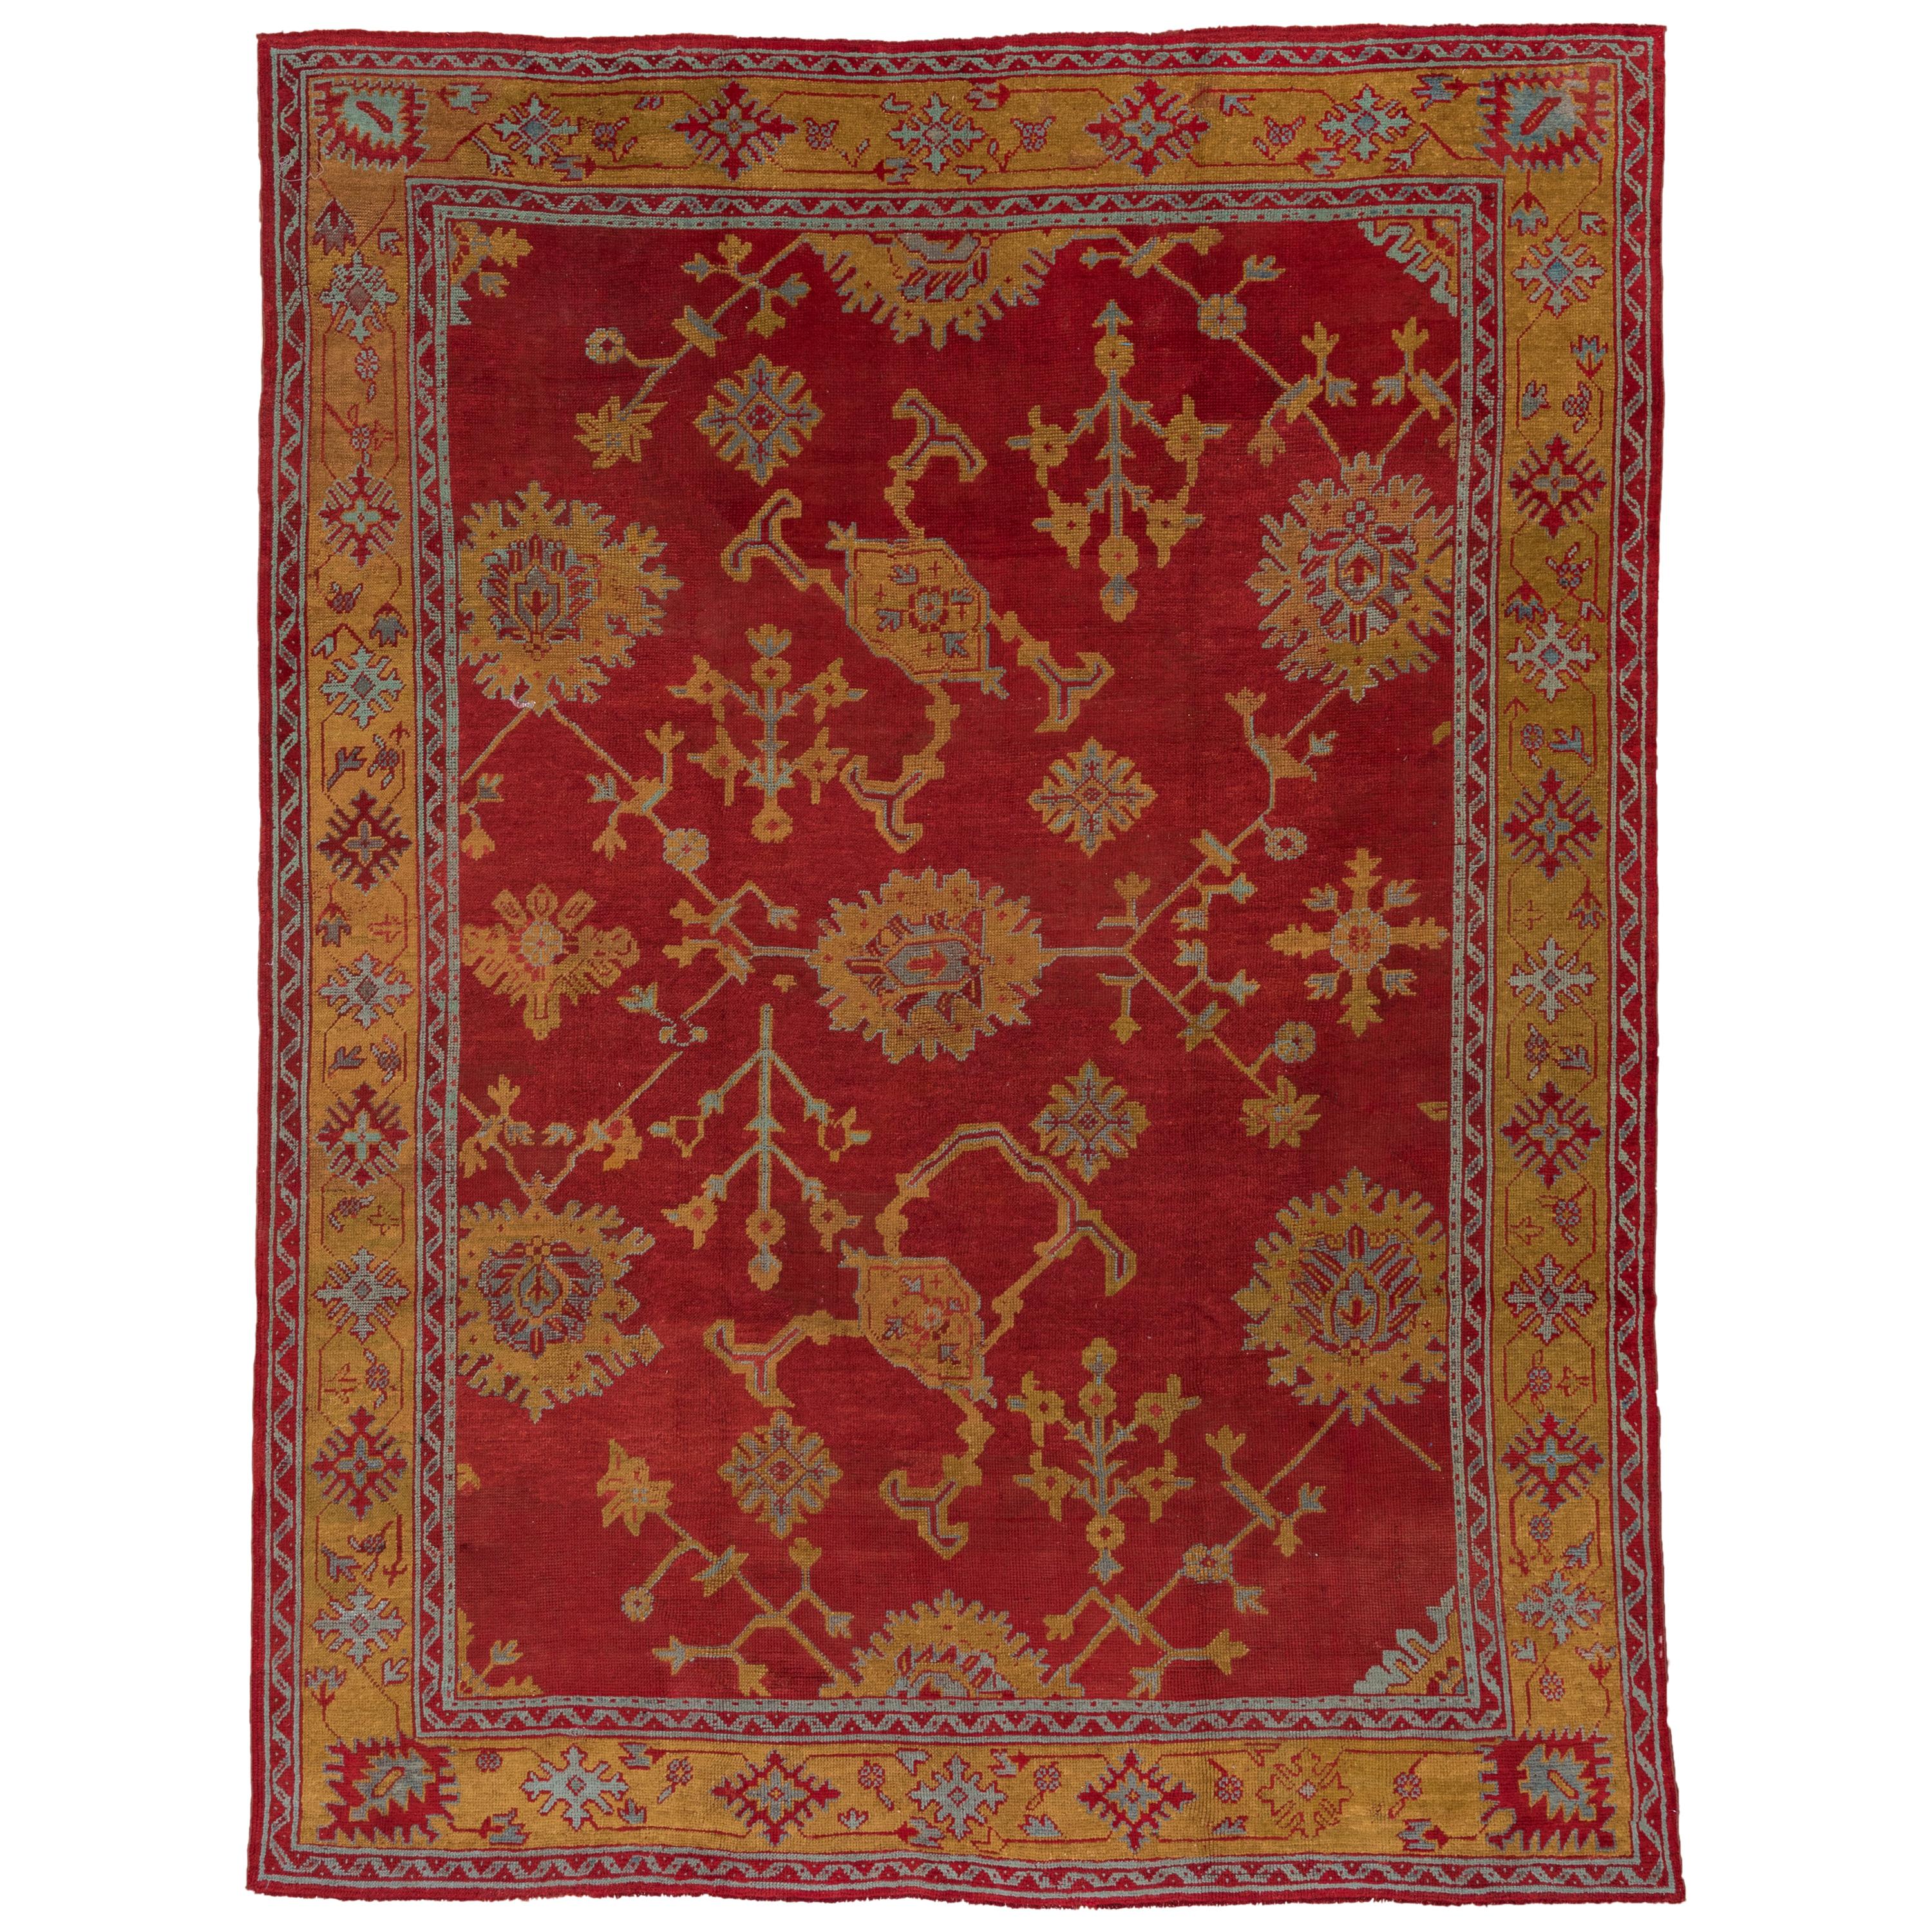 Antique Turkish Red Oushak Carpet, Yellow Borders, circa 1910s For Sale